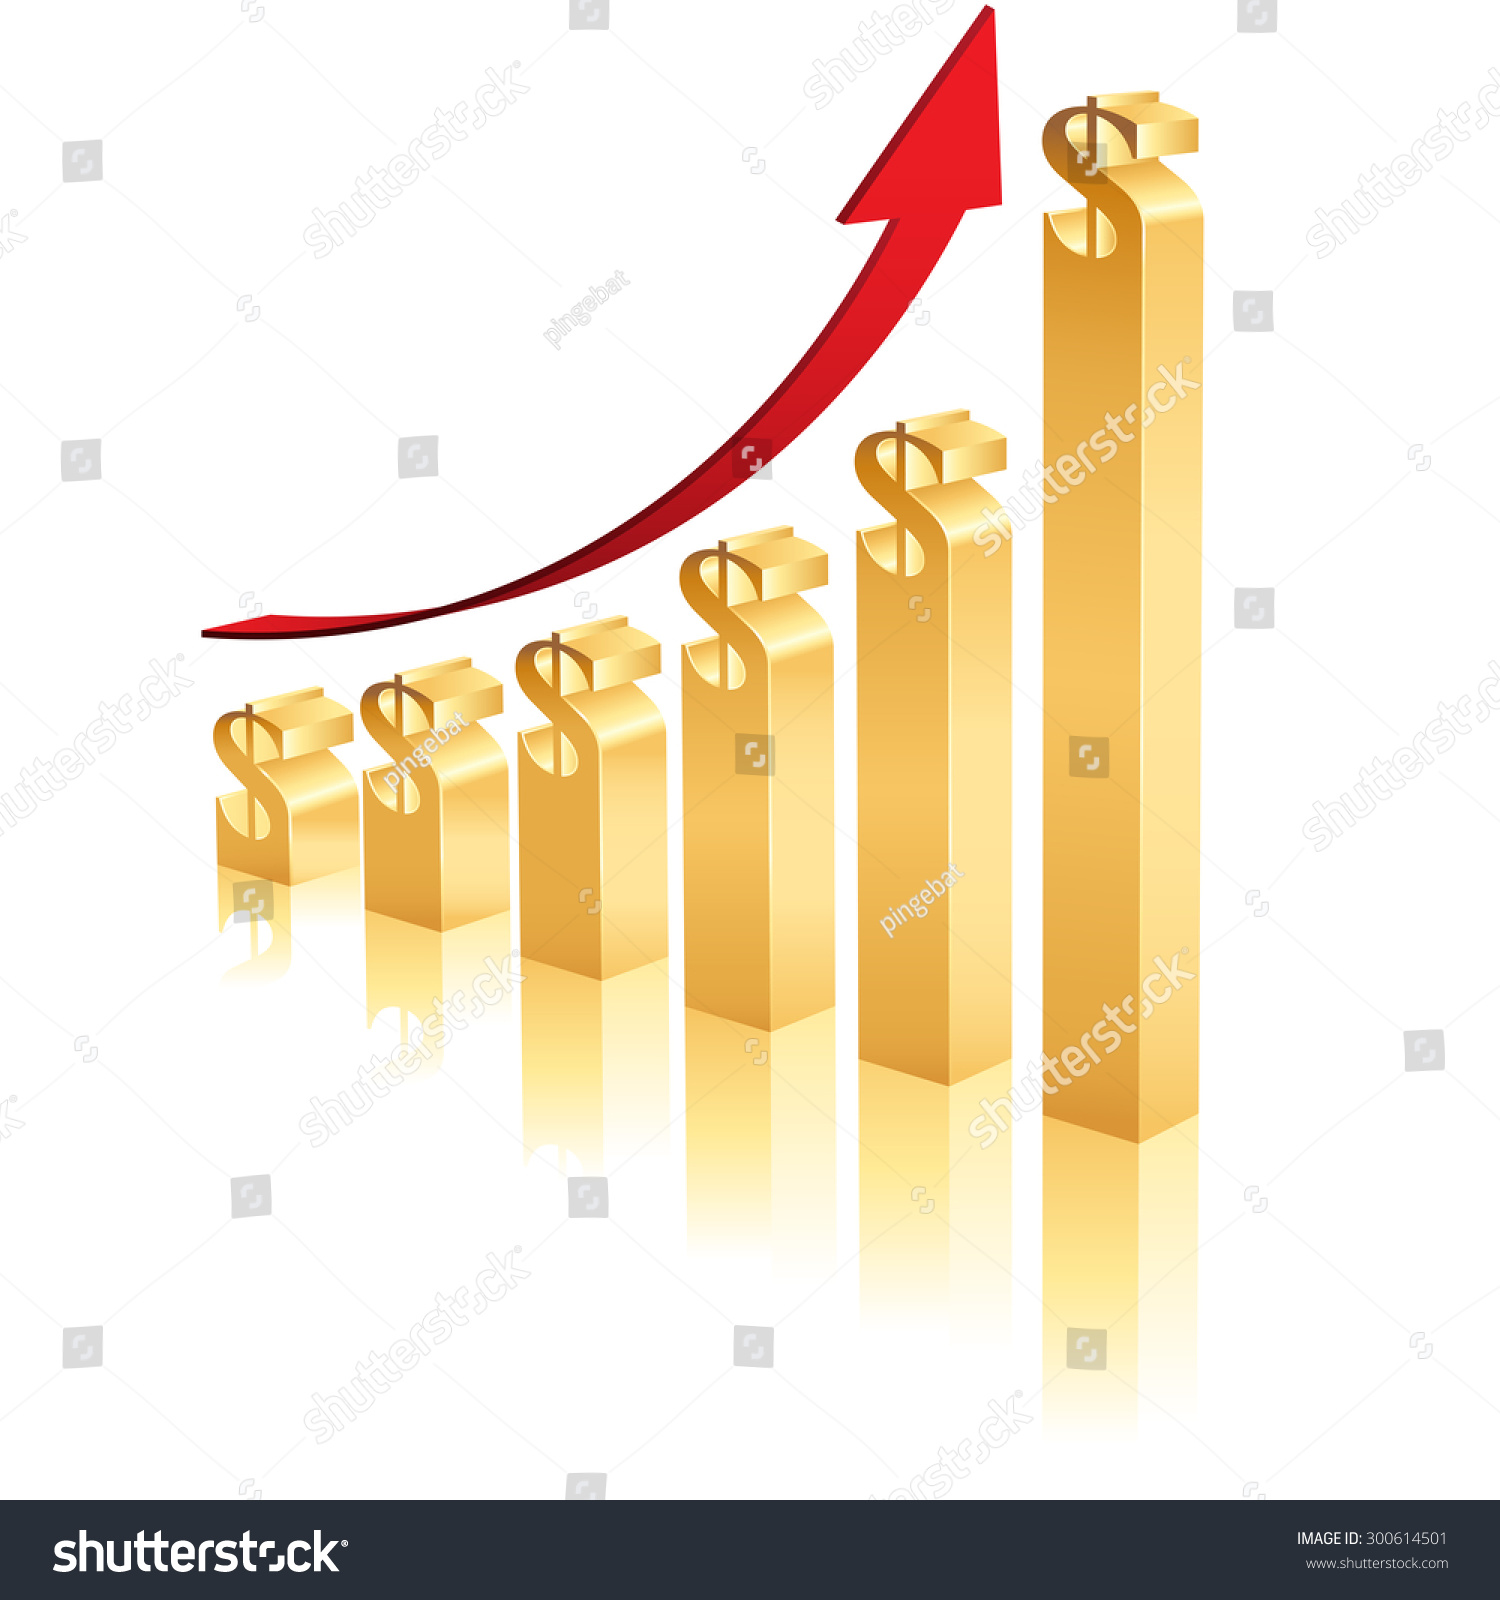 A Business Graph showing an increase in profits using 3D gold bars topped by a dollar symbol #300614501